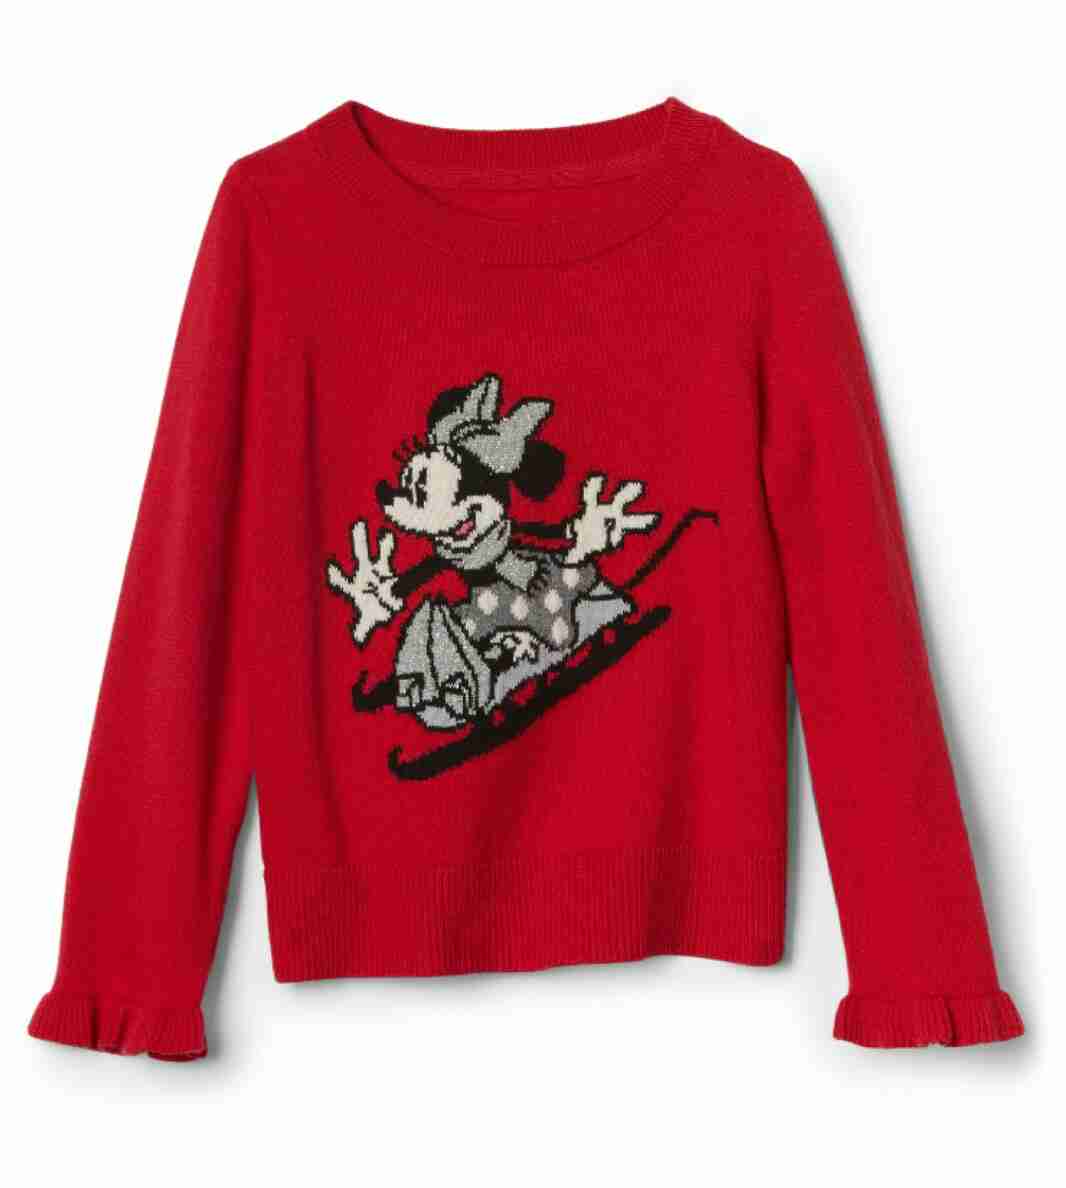 Disney Baby Minnie Mouse ruffle sweater